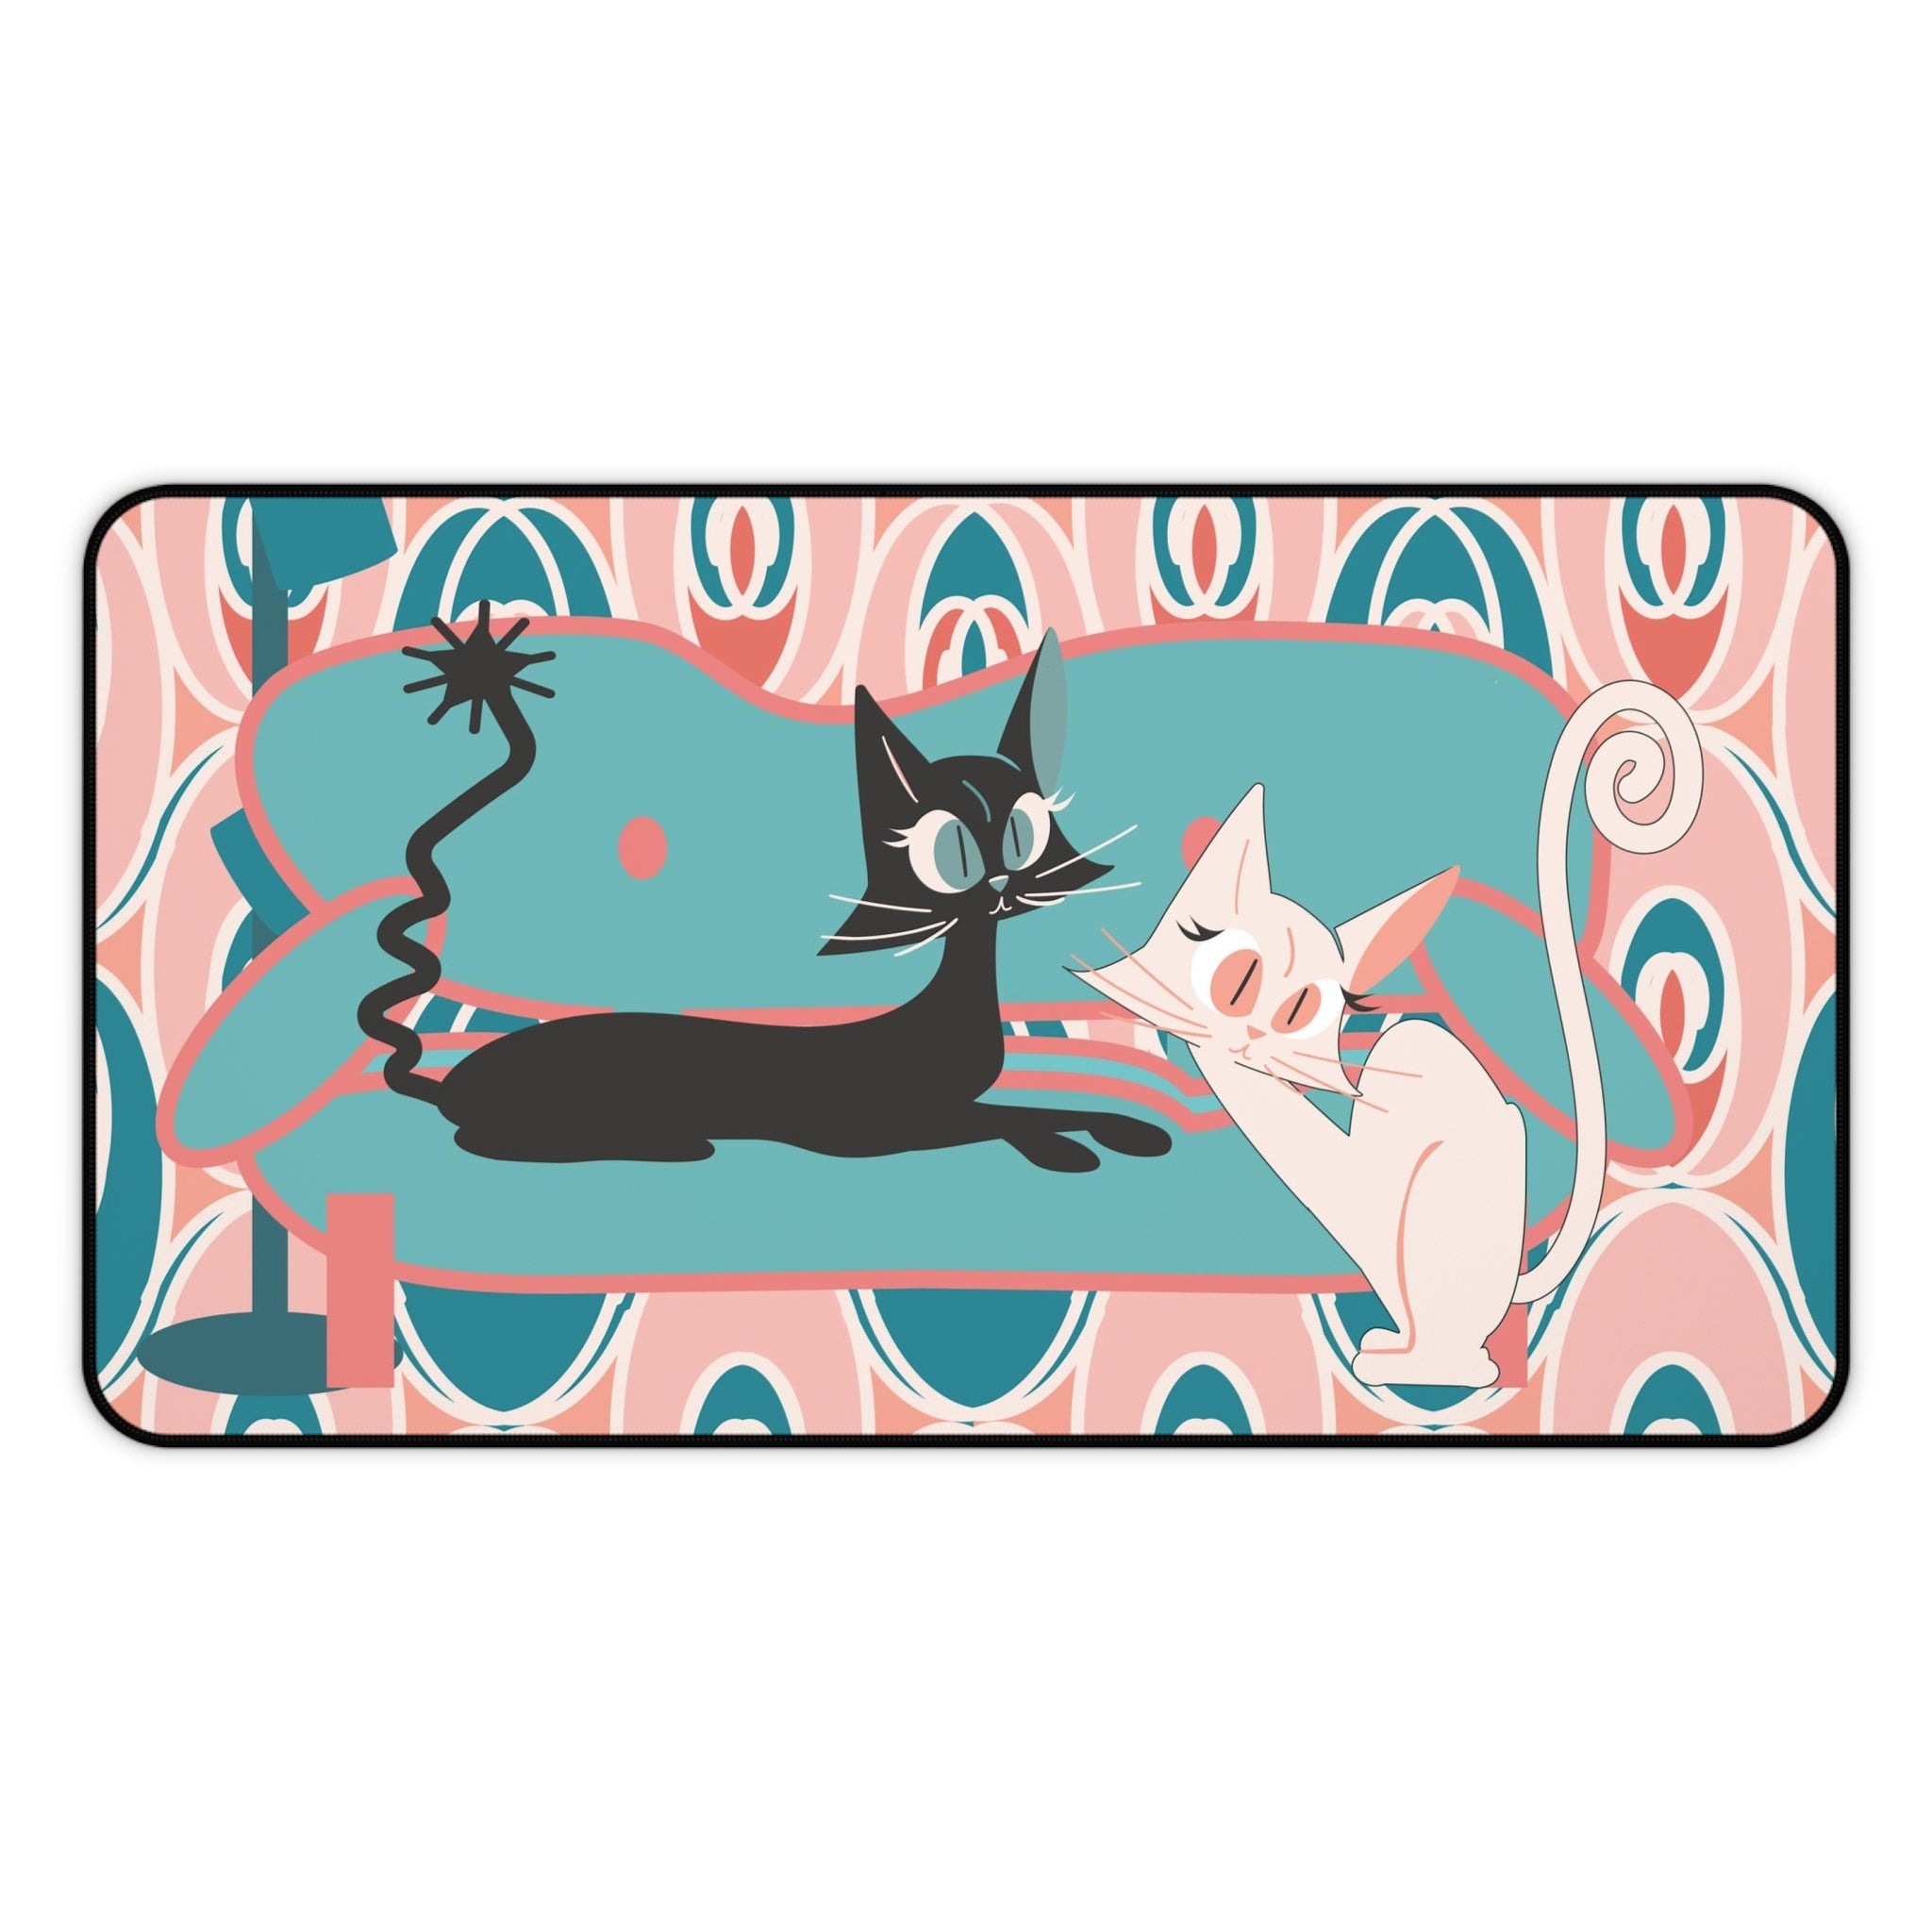 Mid Century Modern Atomic Cat Desk Mat, Pink, Teal, Cute And Kitschy Retro Office Decor